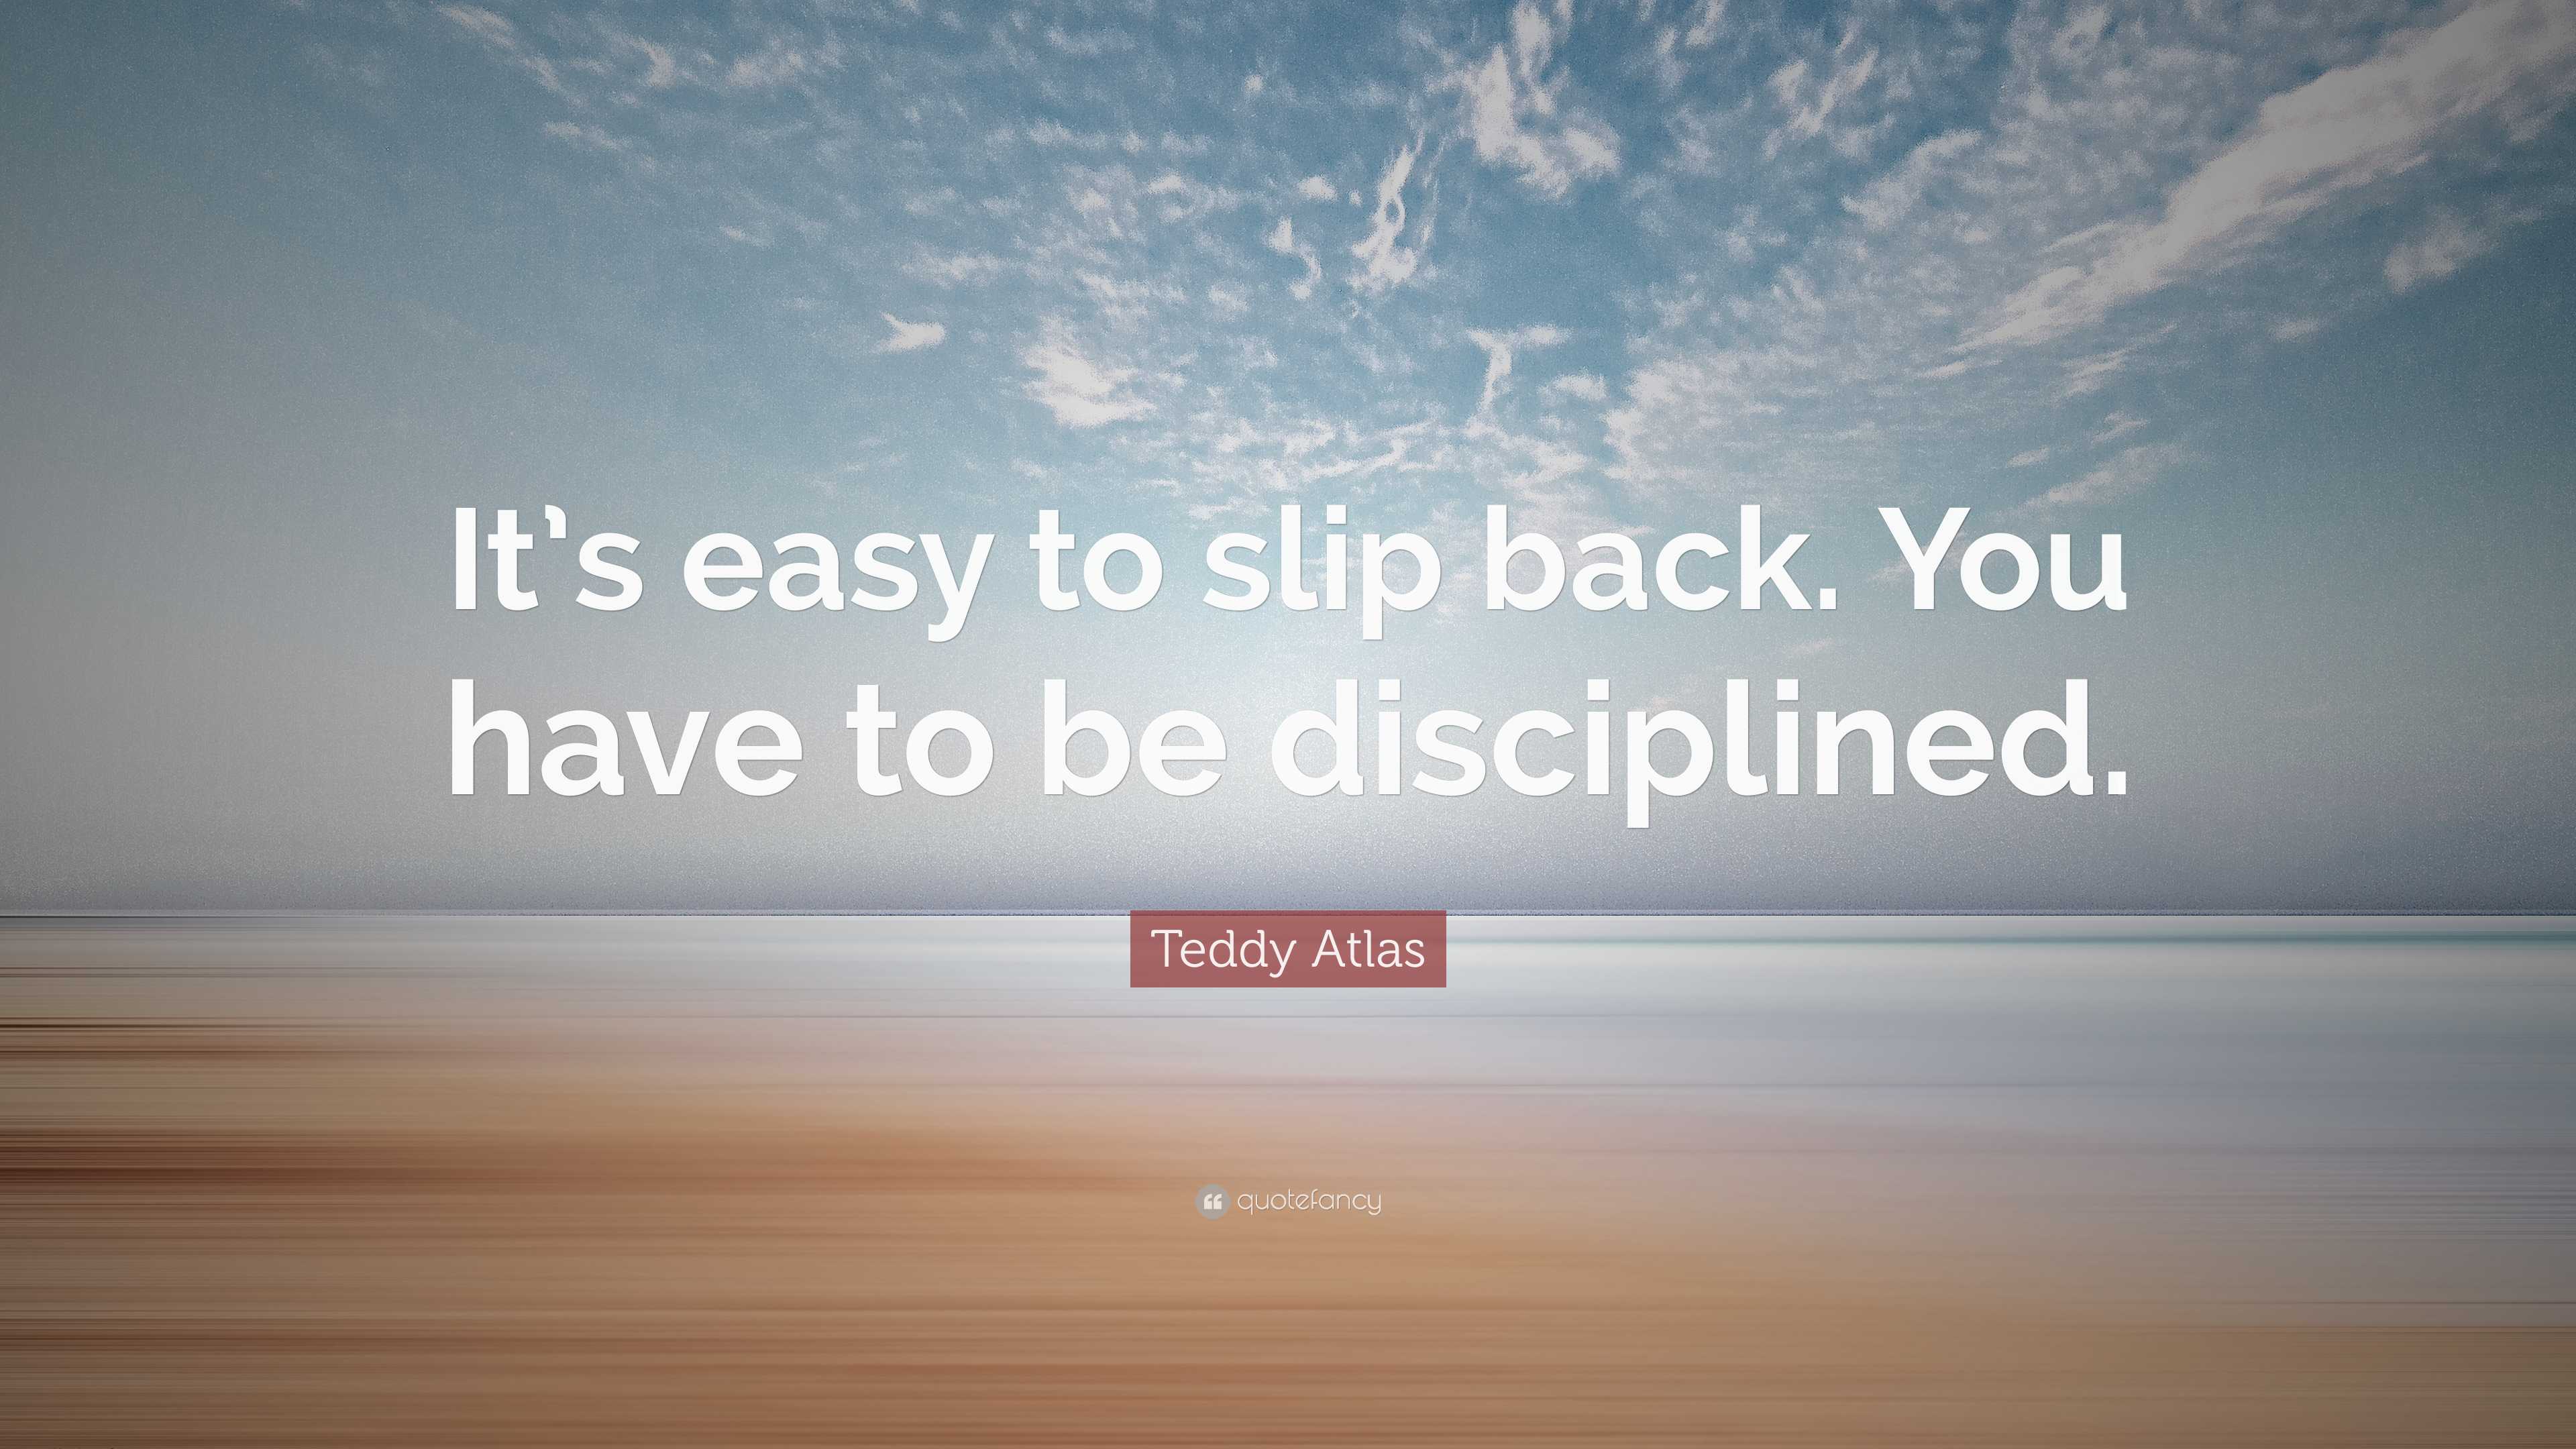 Teddy Atlas Quote: “It's easy to slip back. You have to be